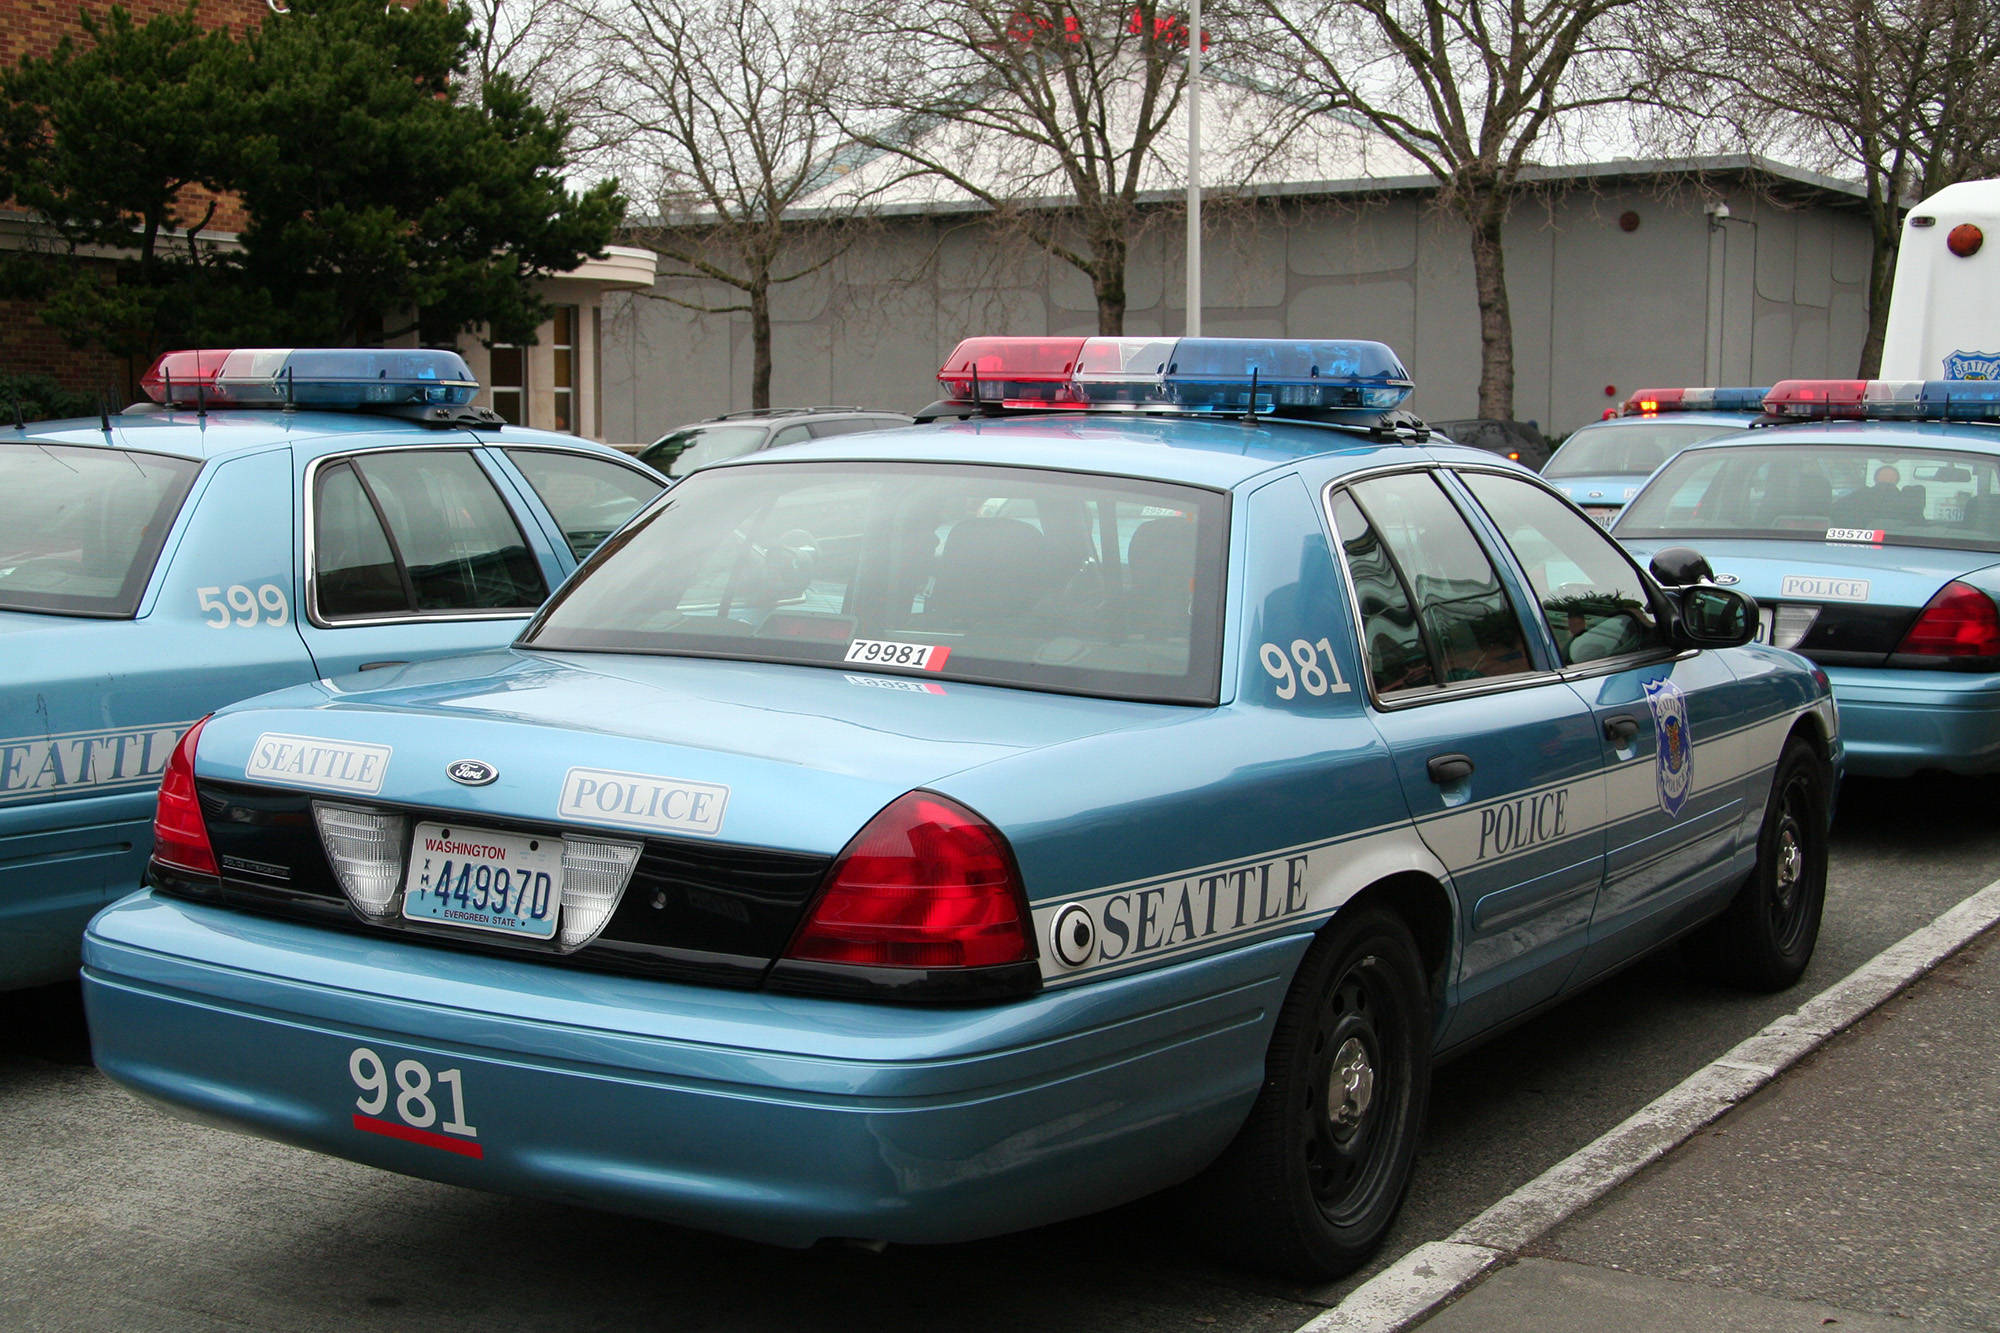 Seattle police car. Photo by Dmitri Fedortchenko, Flickr Creative Commons.